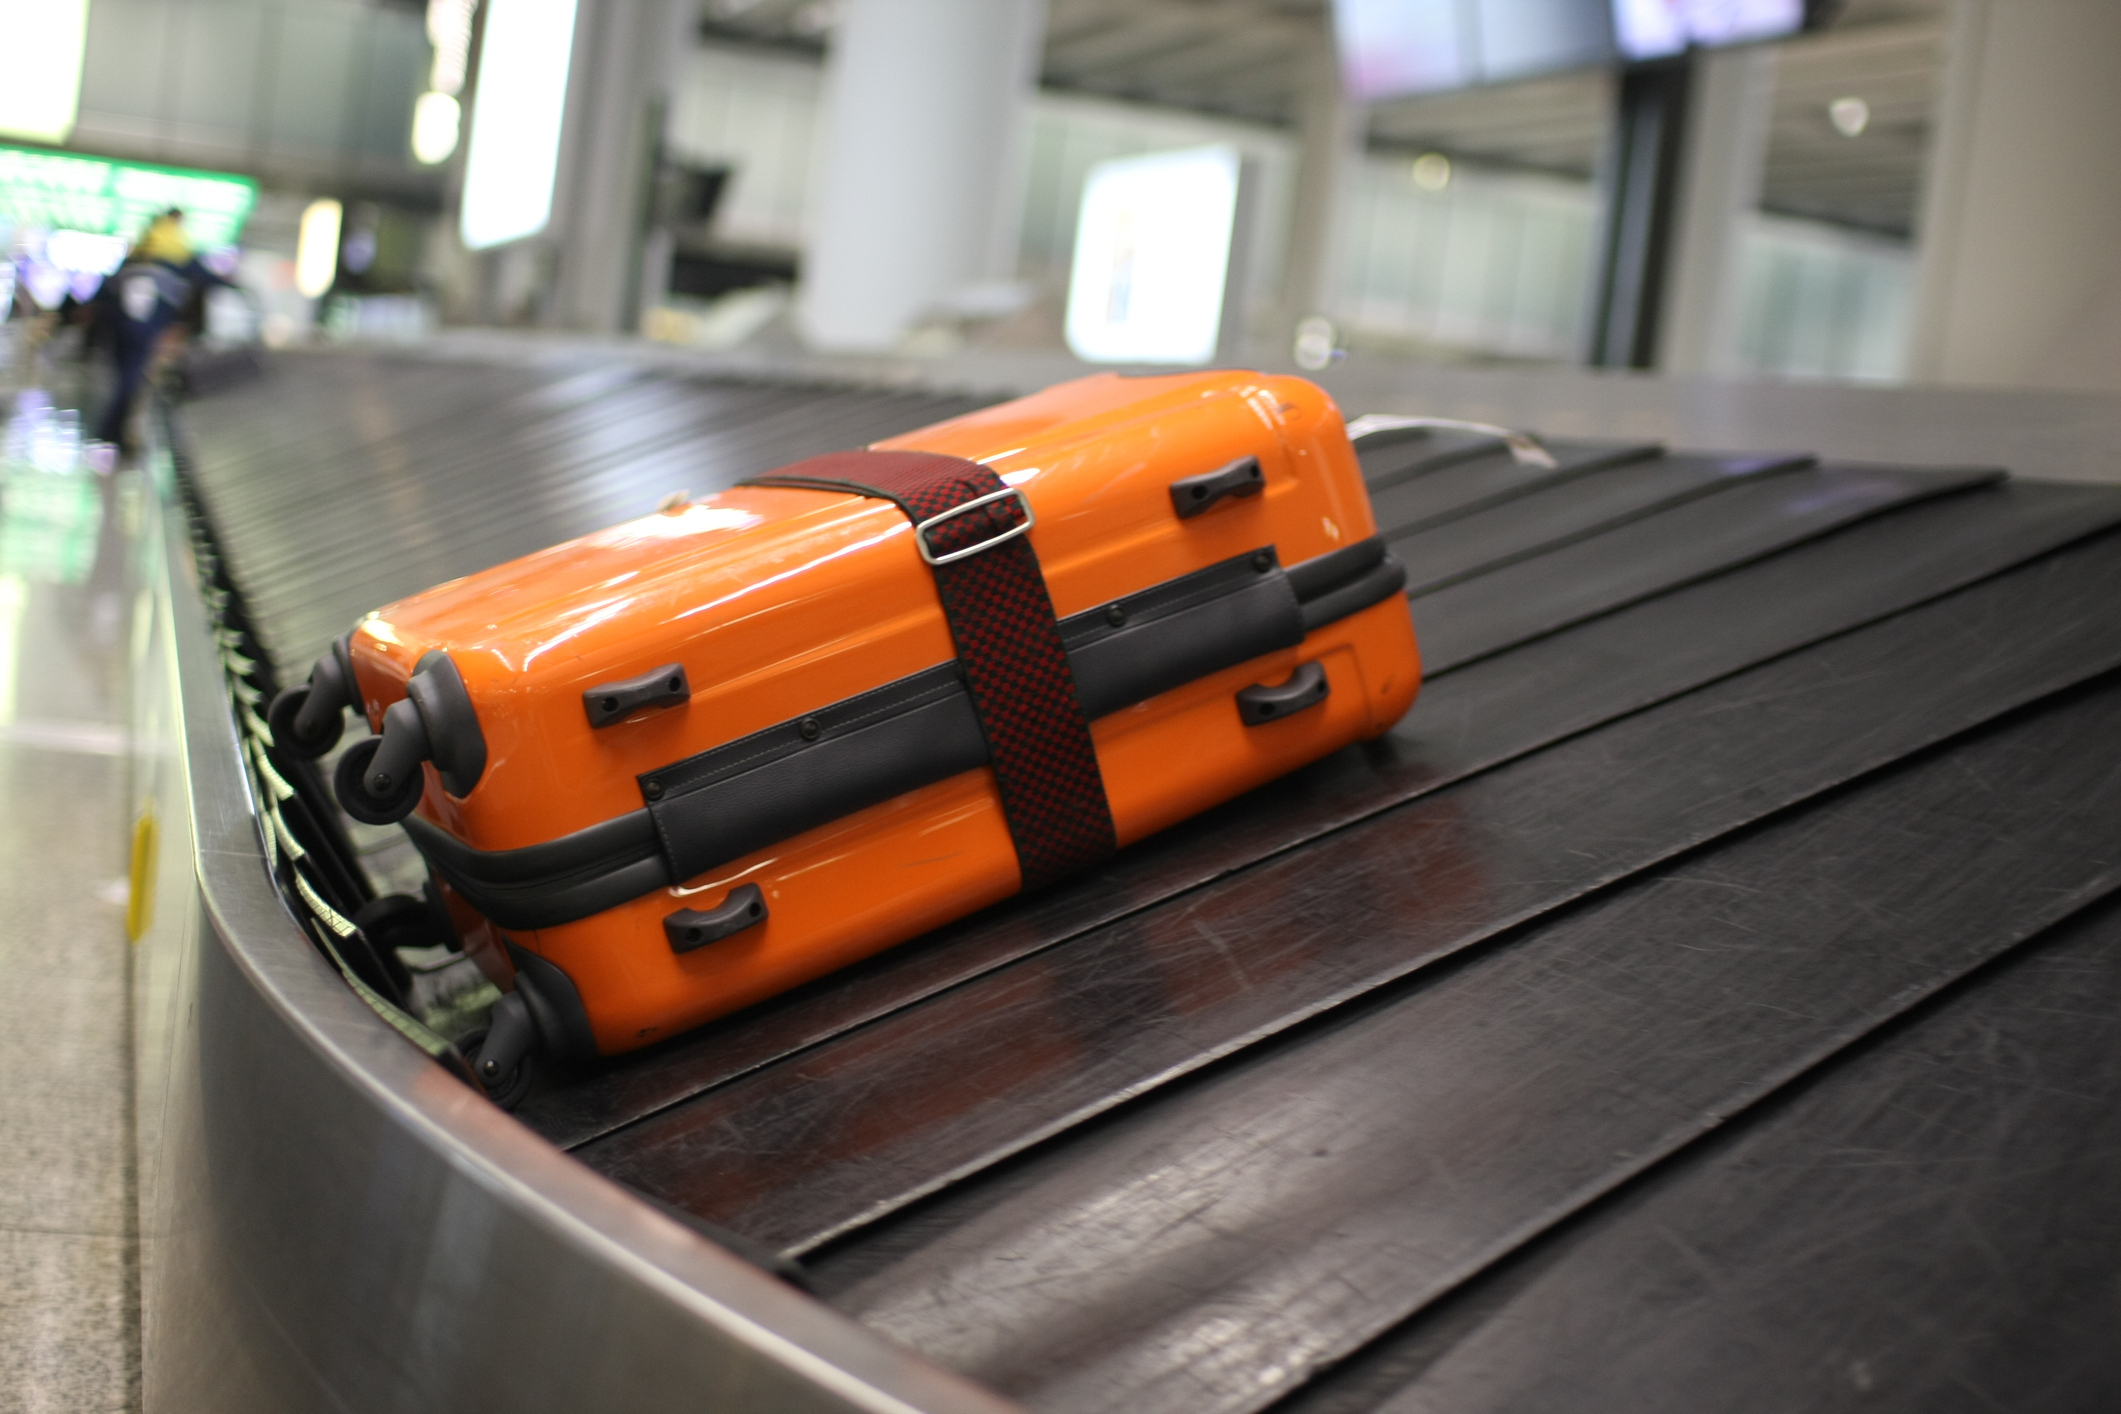 The Best Times to Buy Luggage - NerdWallet